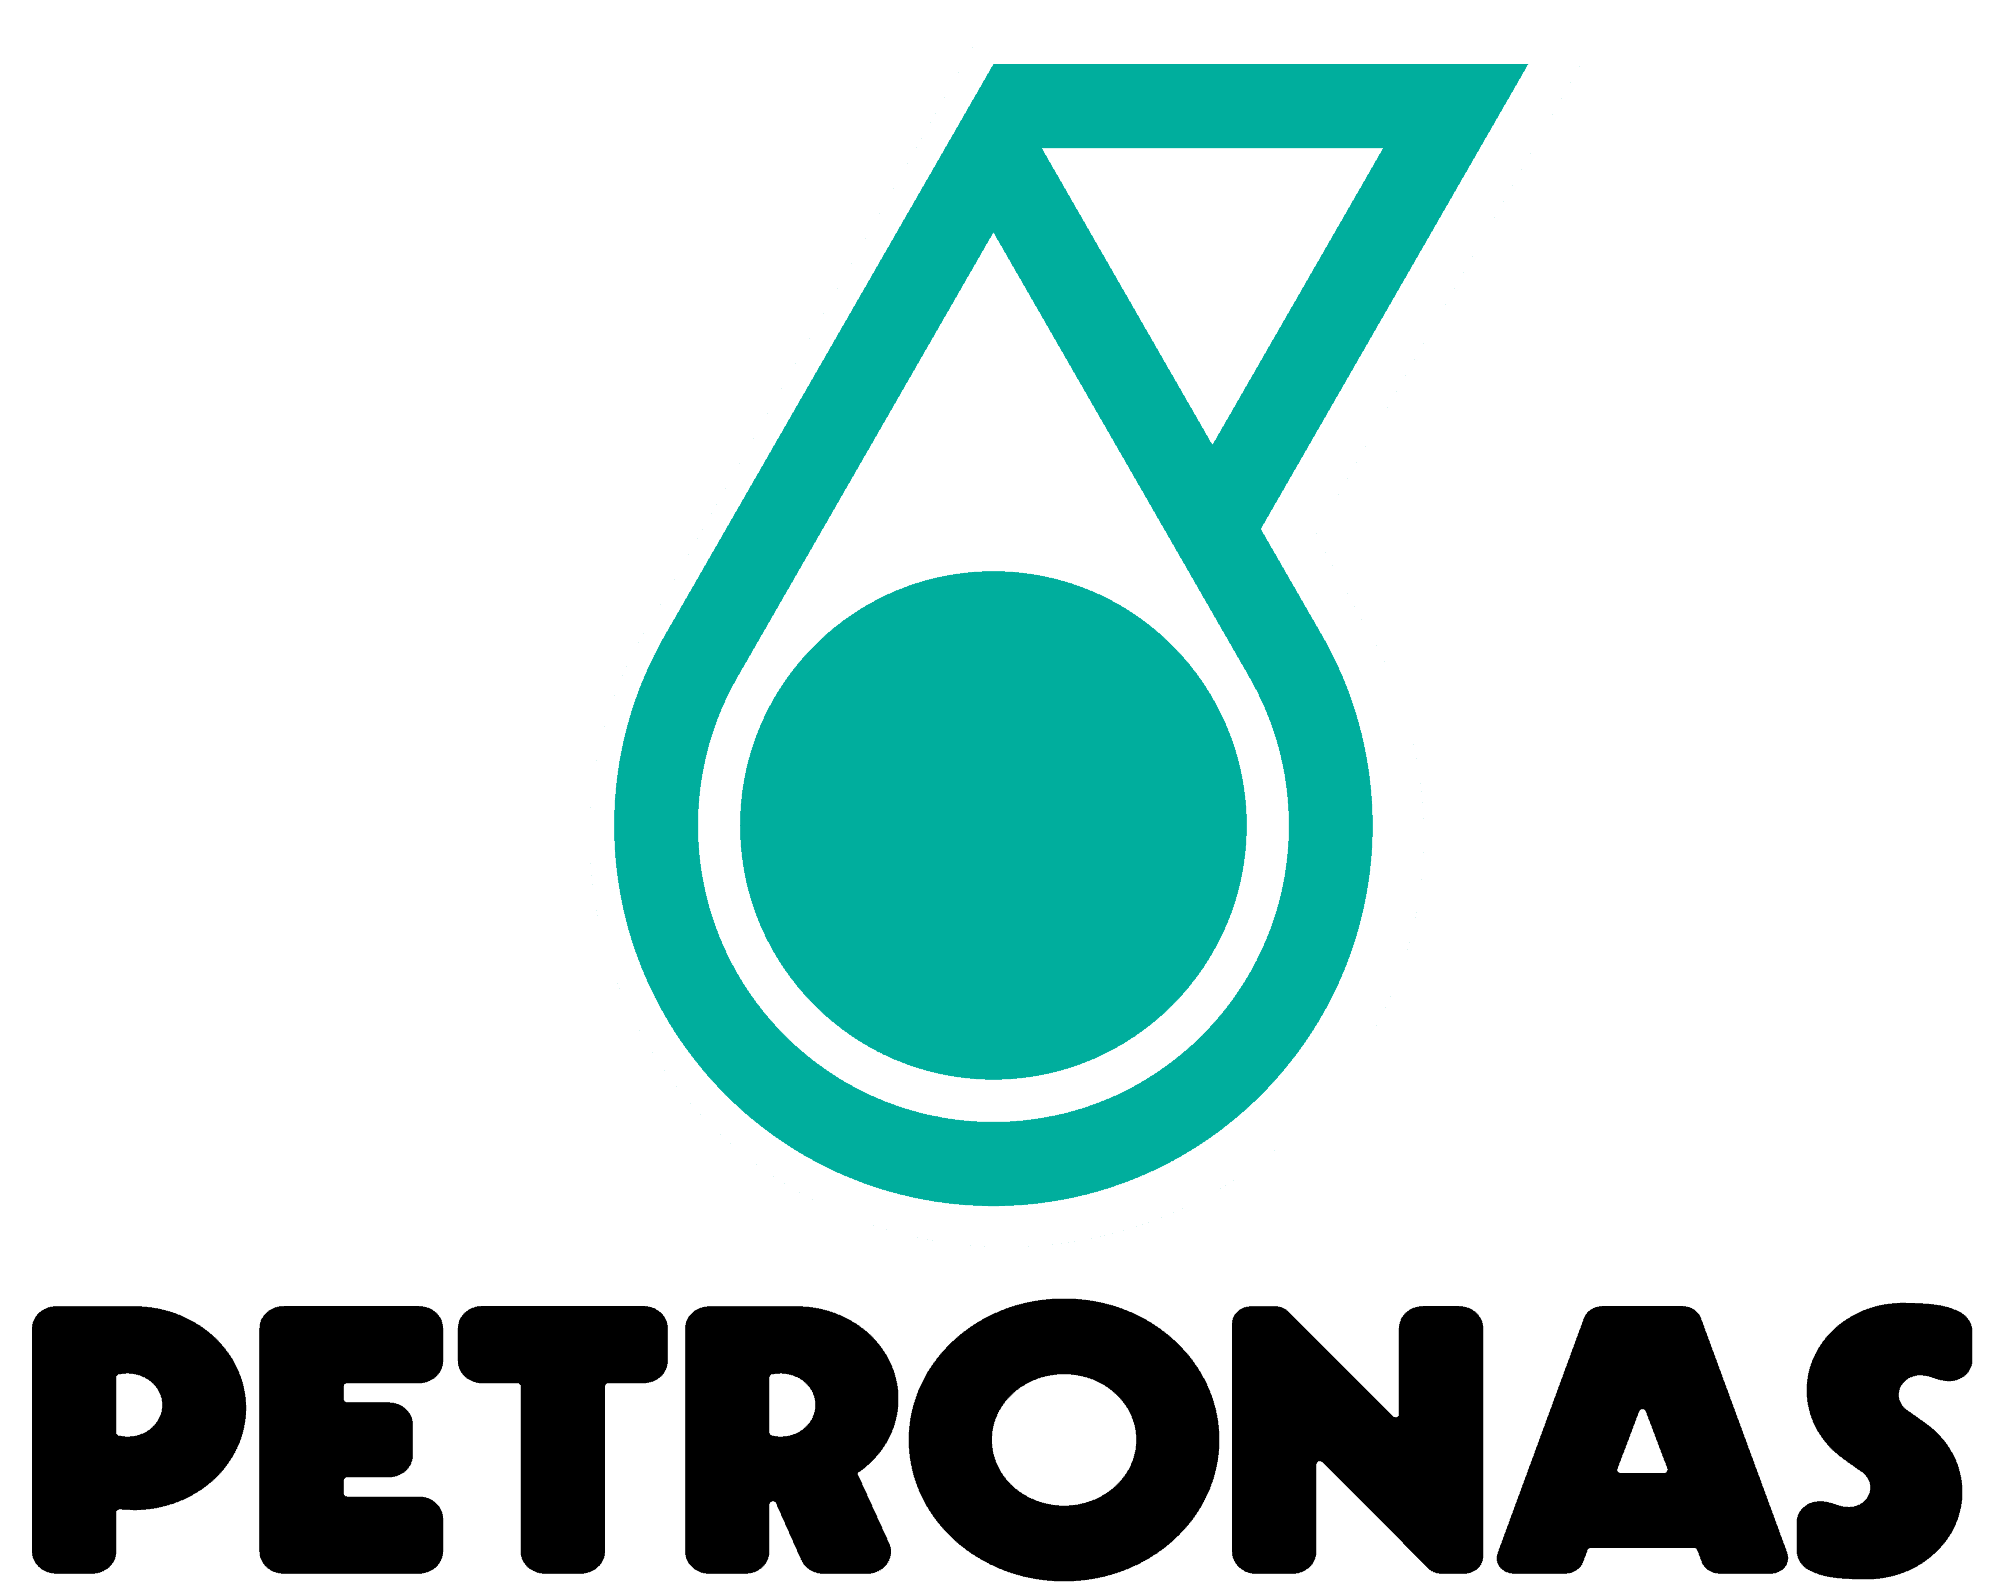 The petronas logo on a blue background, designed by a business coach.